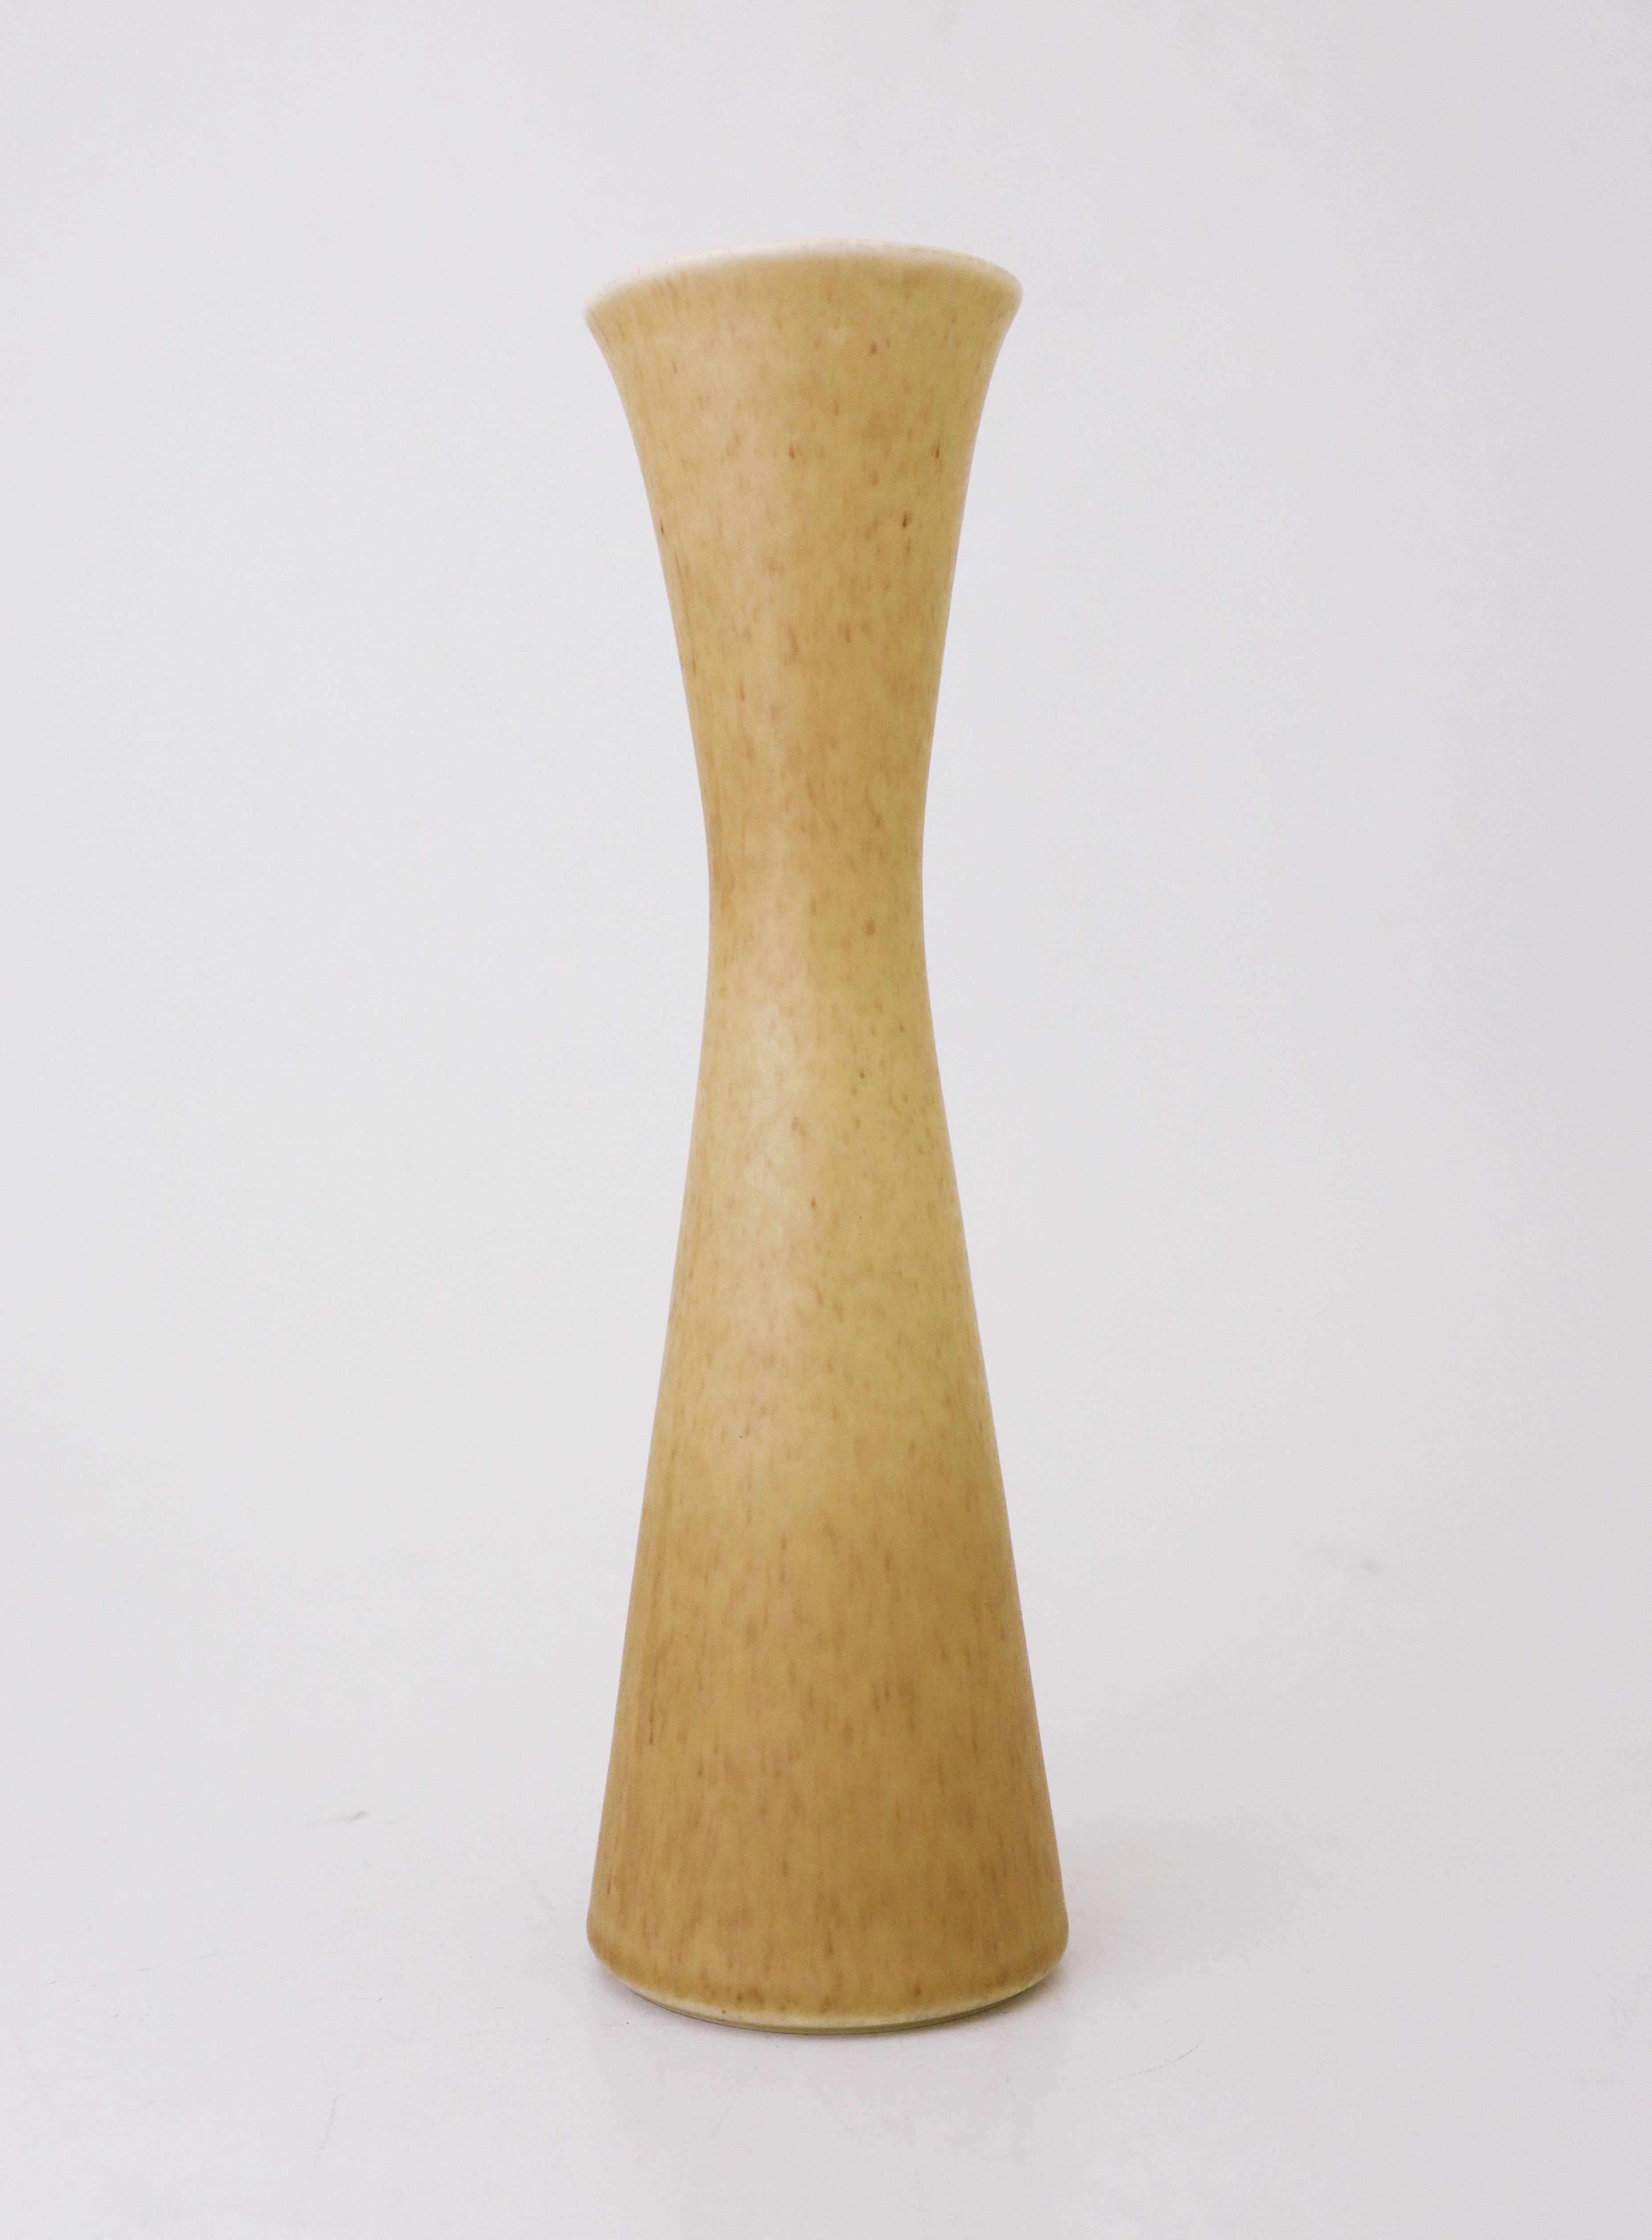 A vase with a yellow glaze designed by Gunnar Nylund at Rörstrand of model Granola, the vase is 26 cm (10.4